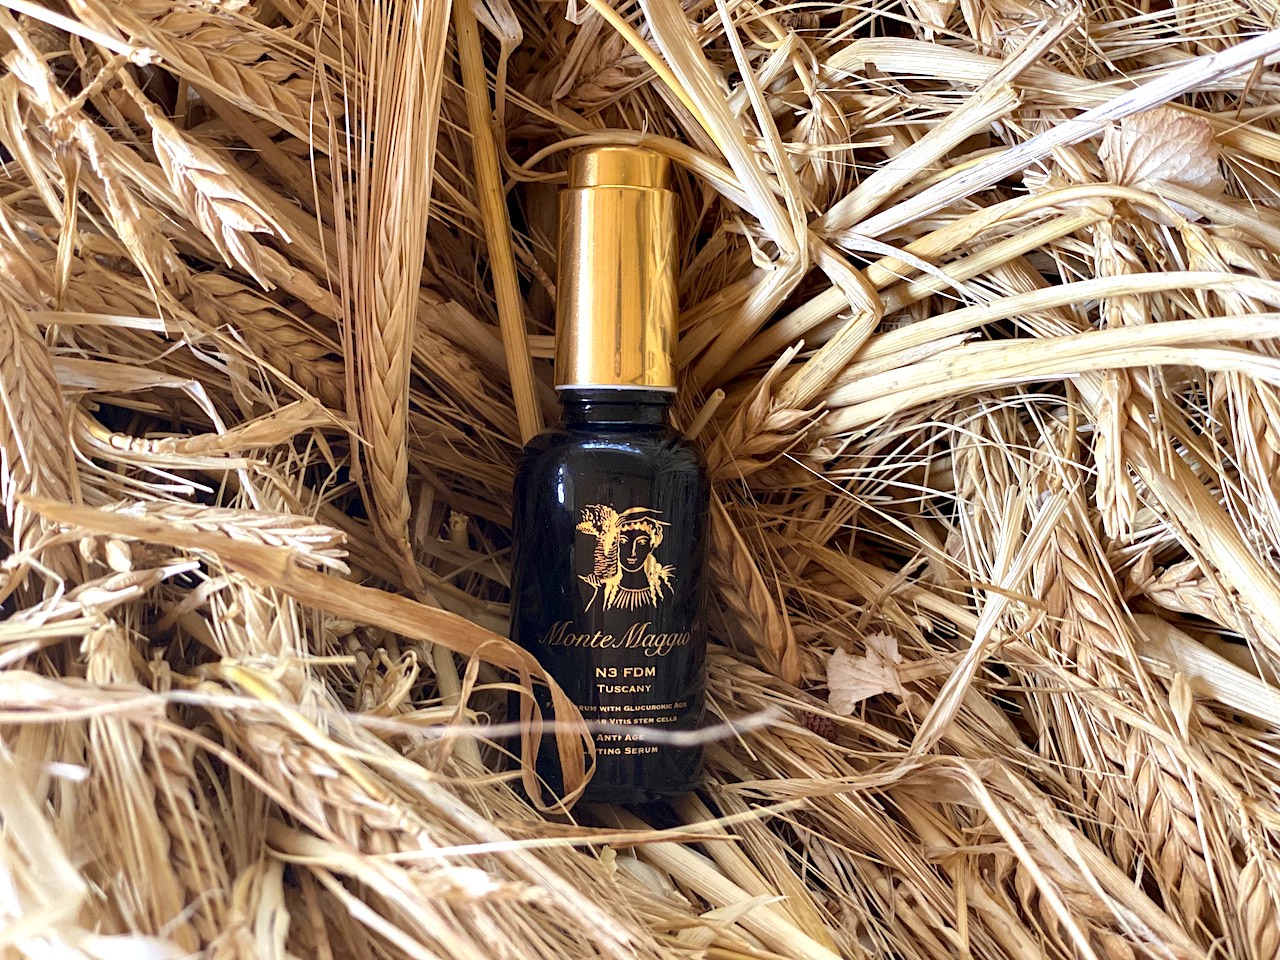 Tuscany's best beauty products made from wine by products - like this face serum